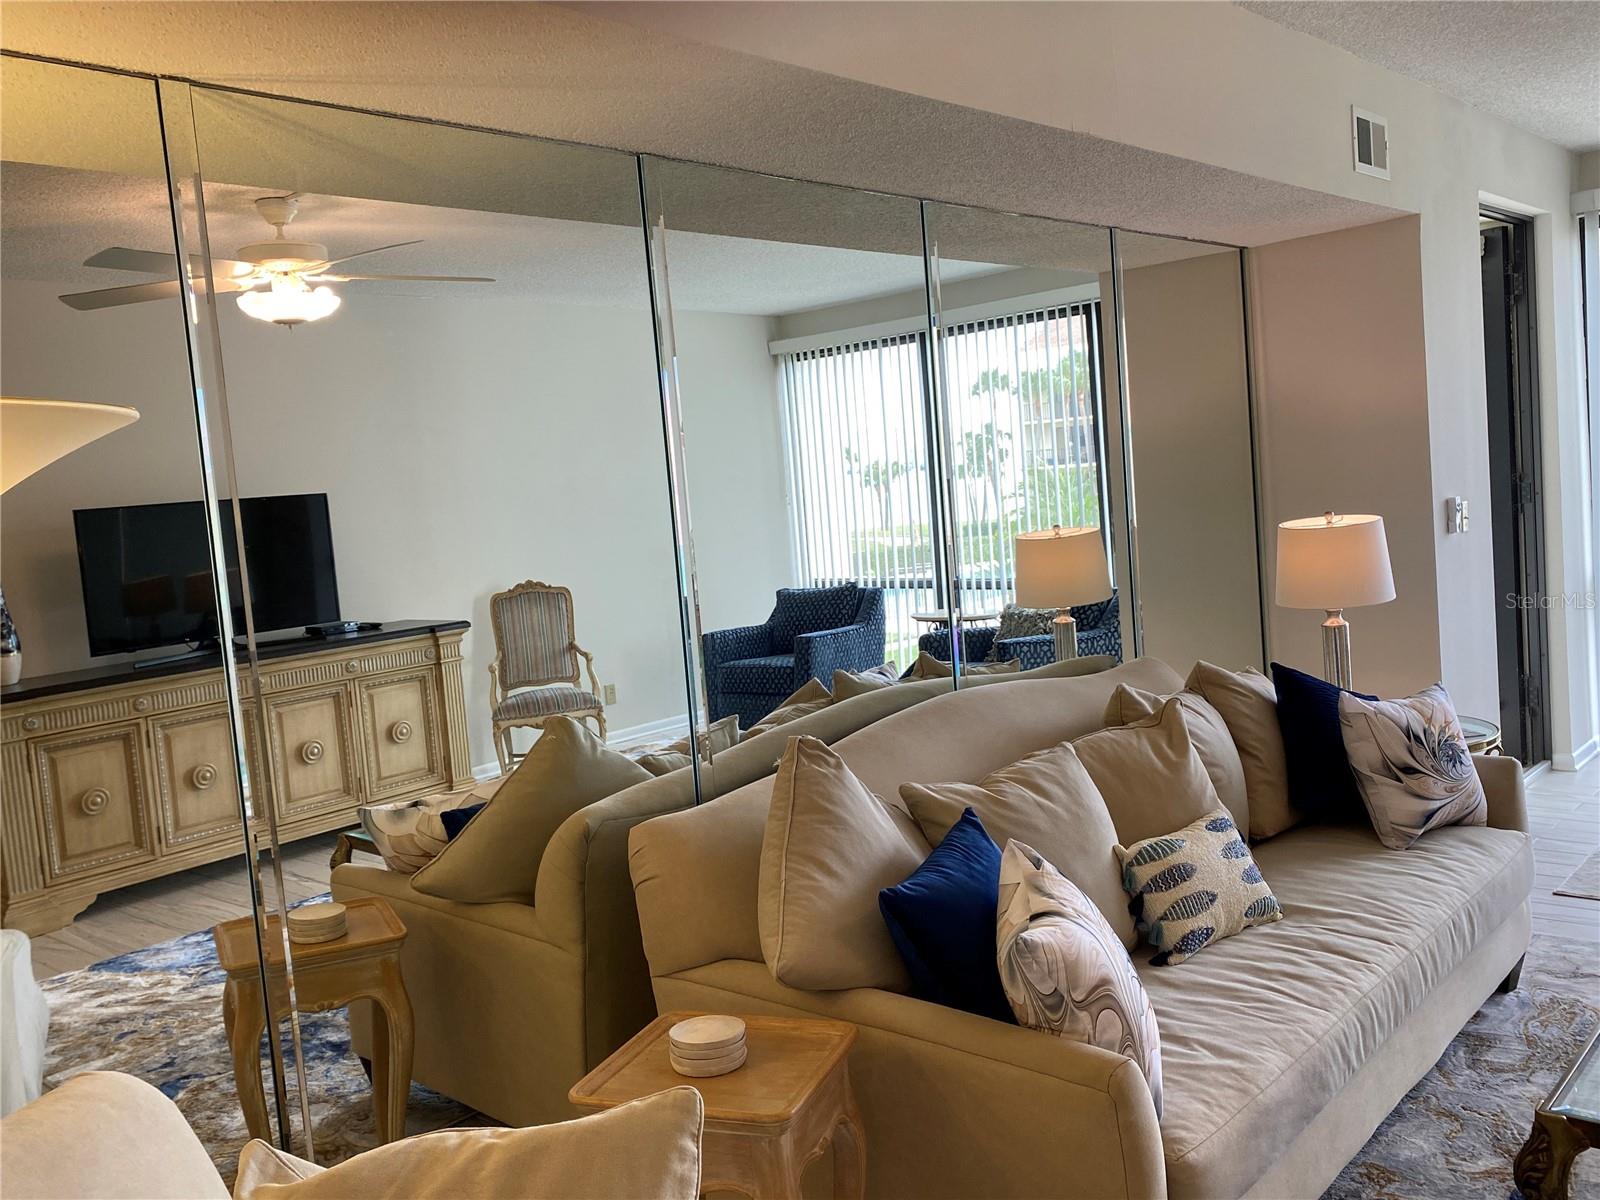 Water view is reflected in the mirrors.